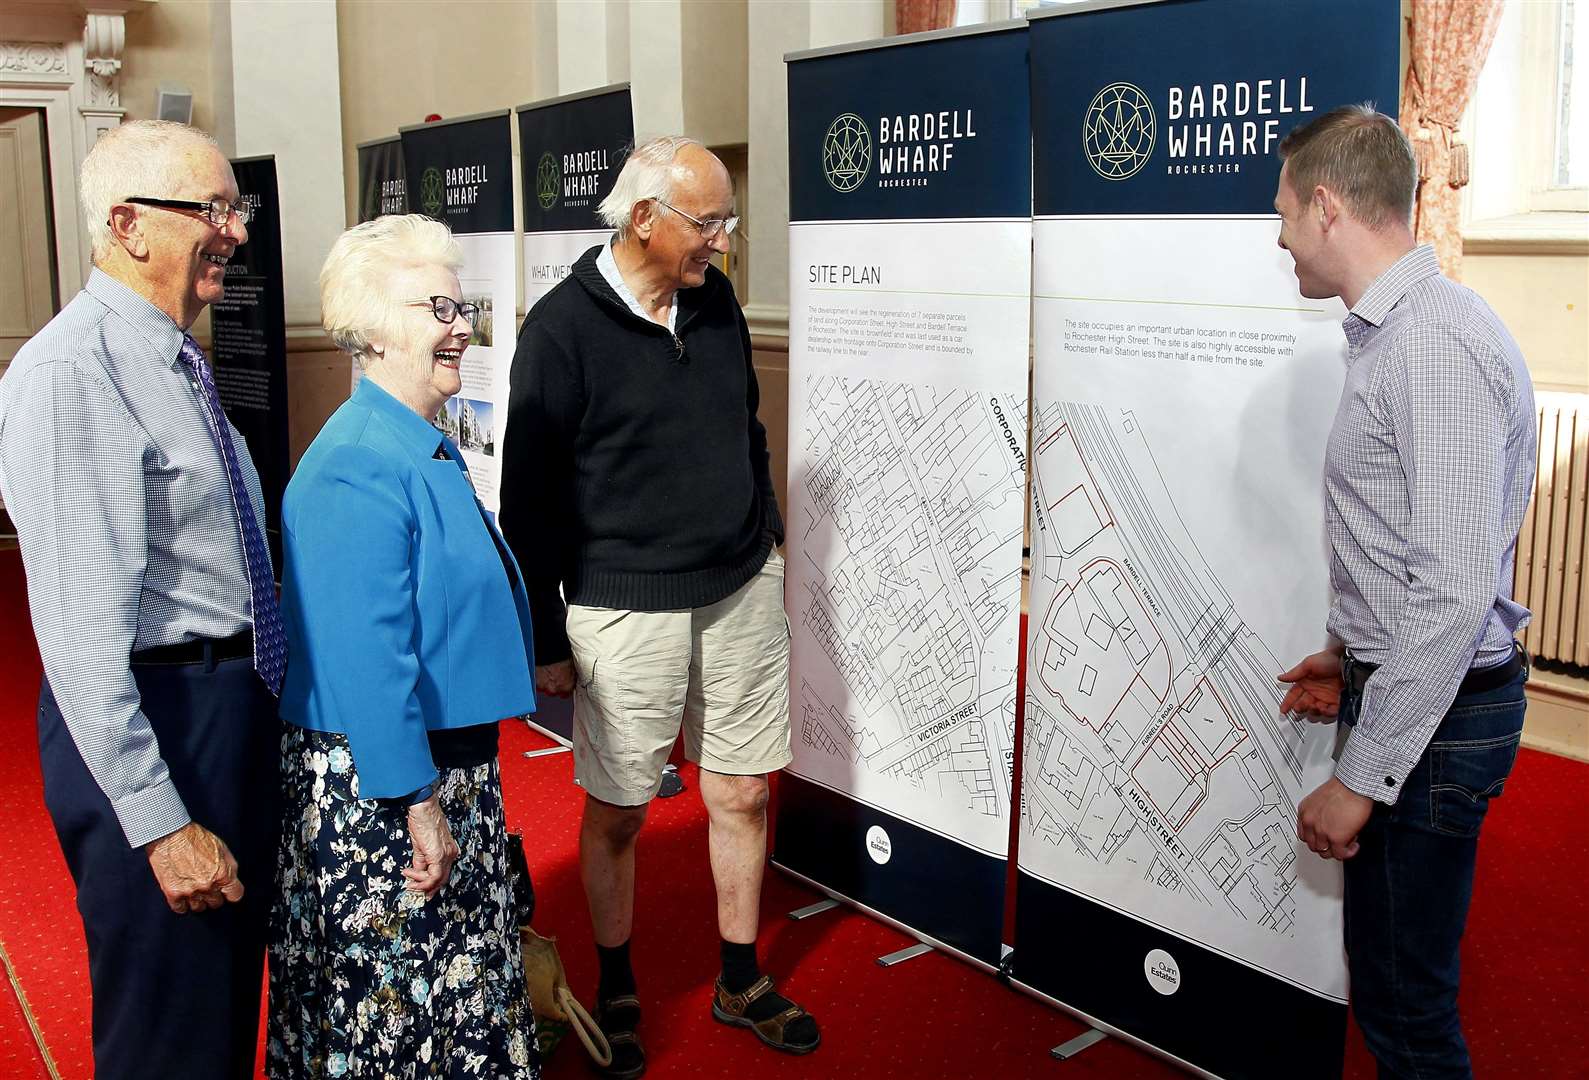 Public consultation to the plans for Rochester's Bardell Wharf